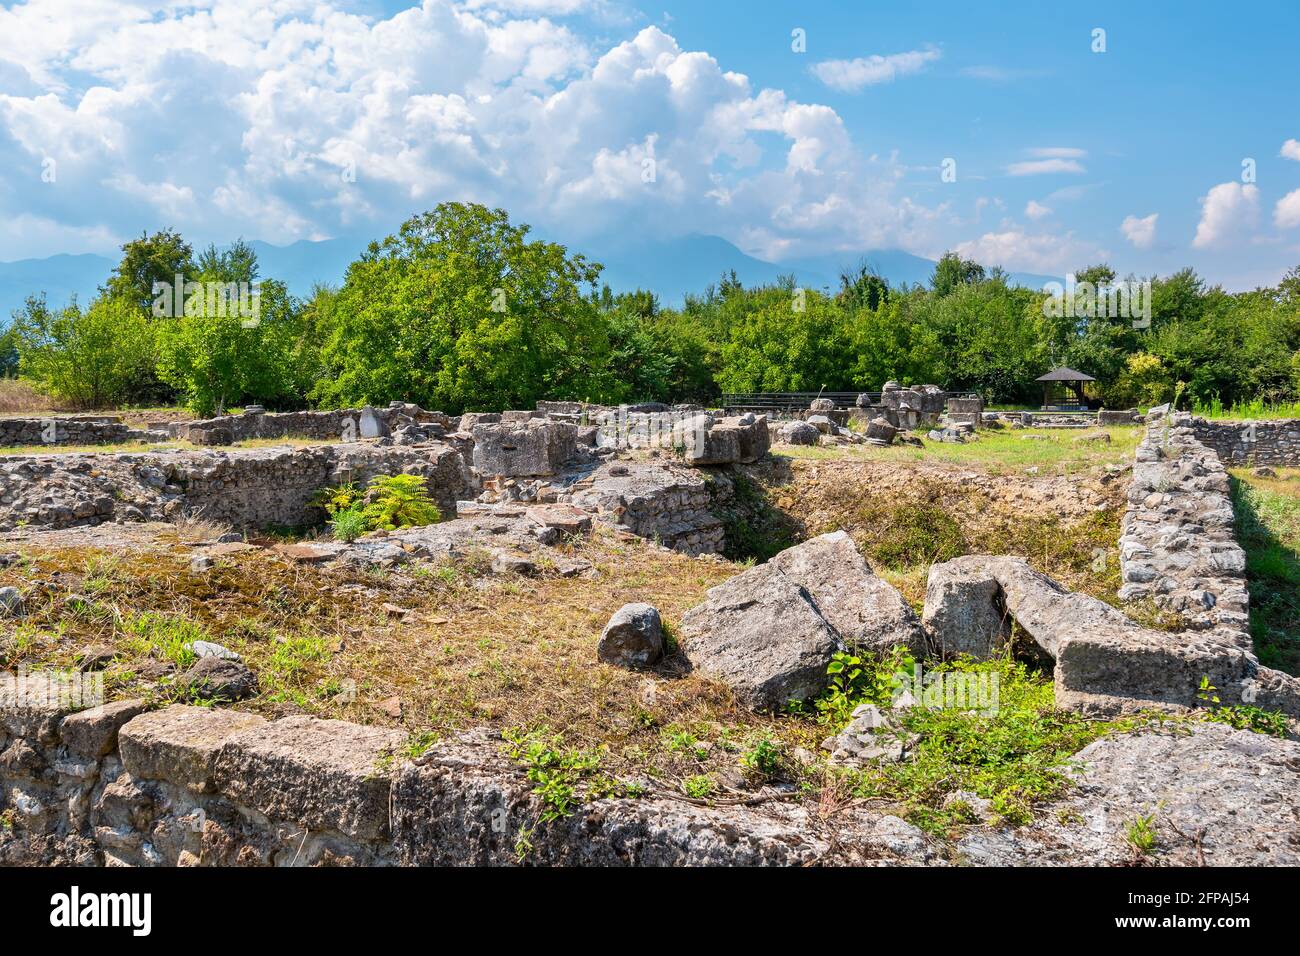 Ruins of Episcopal Basilica at the Archaeological Park of Dion. Mount Olympus is in the background. Pieria, Macedonia, Greece Stock Photo